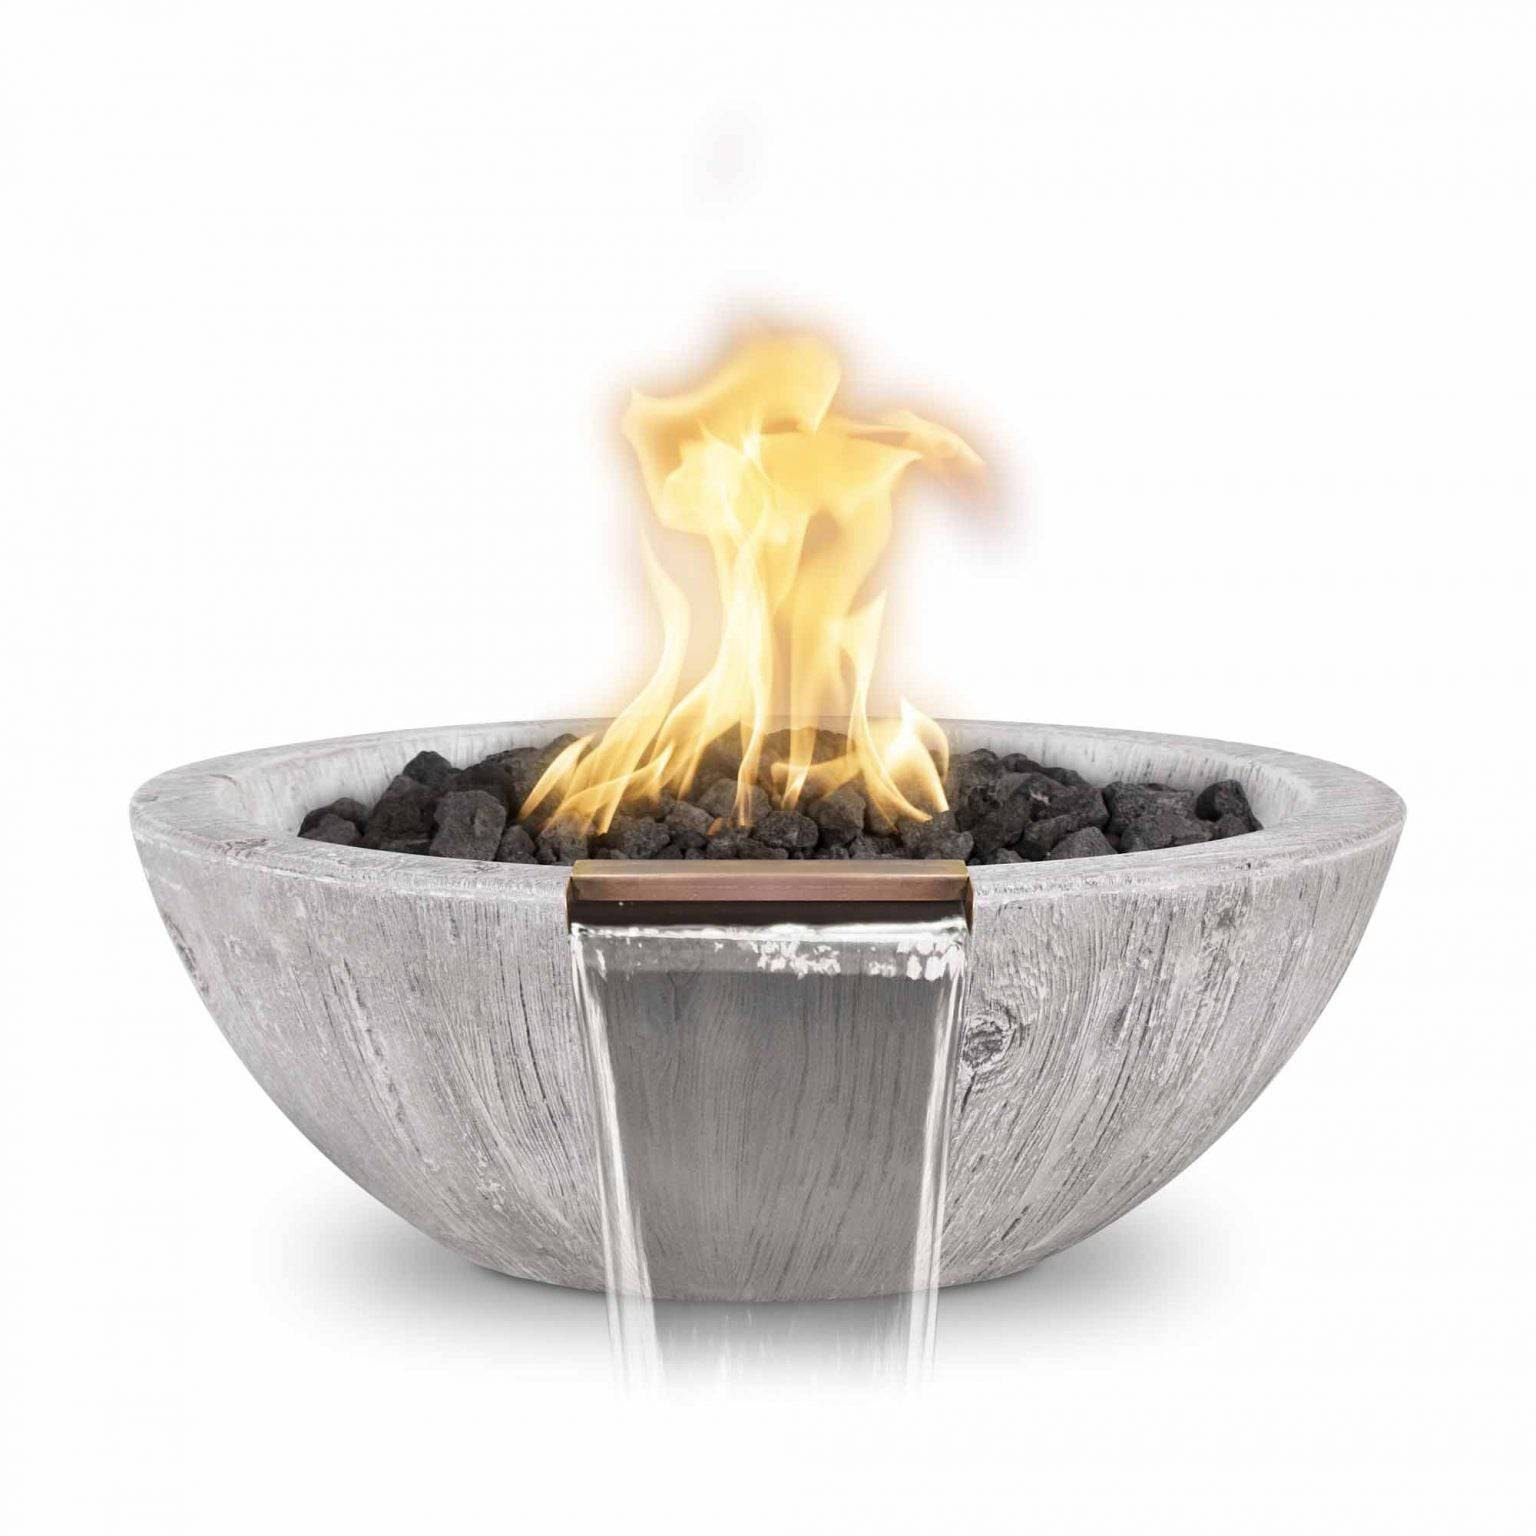 The Outdoor Plus Sedona Fire & Water Bowl Wood Grain Concrete OPT-27RWGFW - Serenity Provision